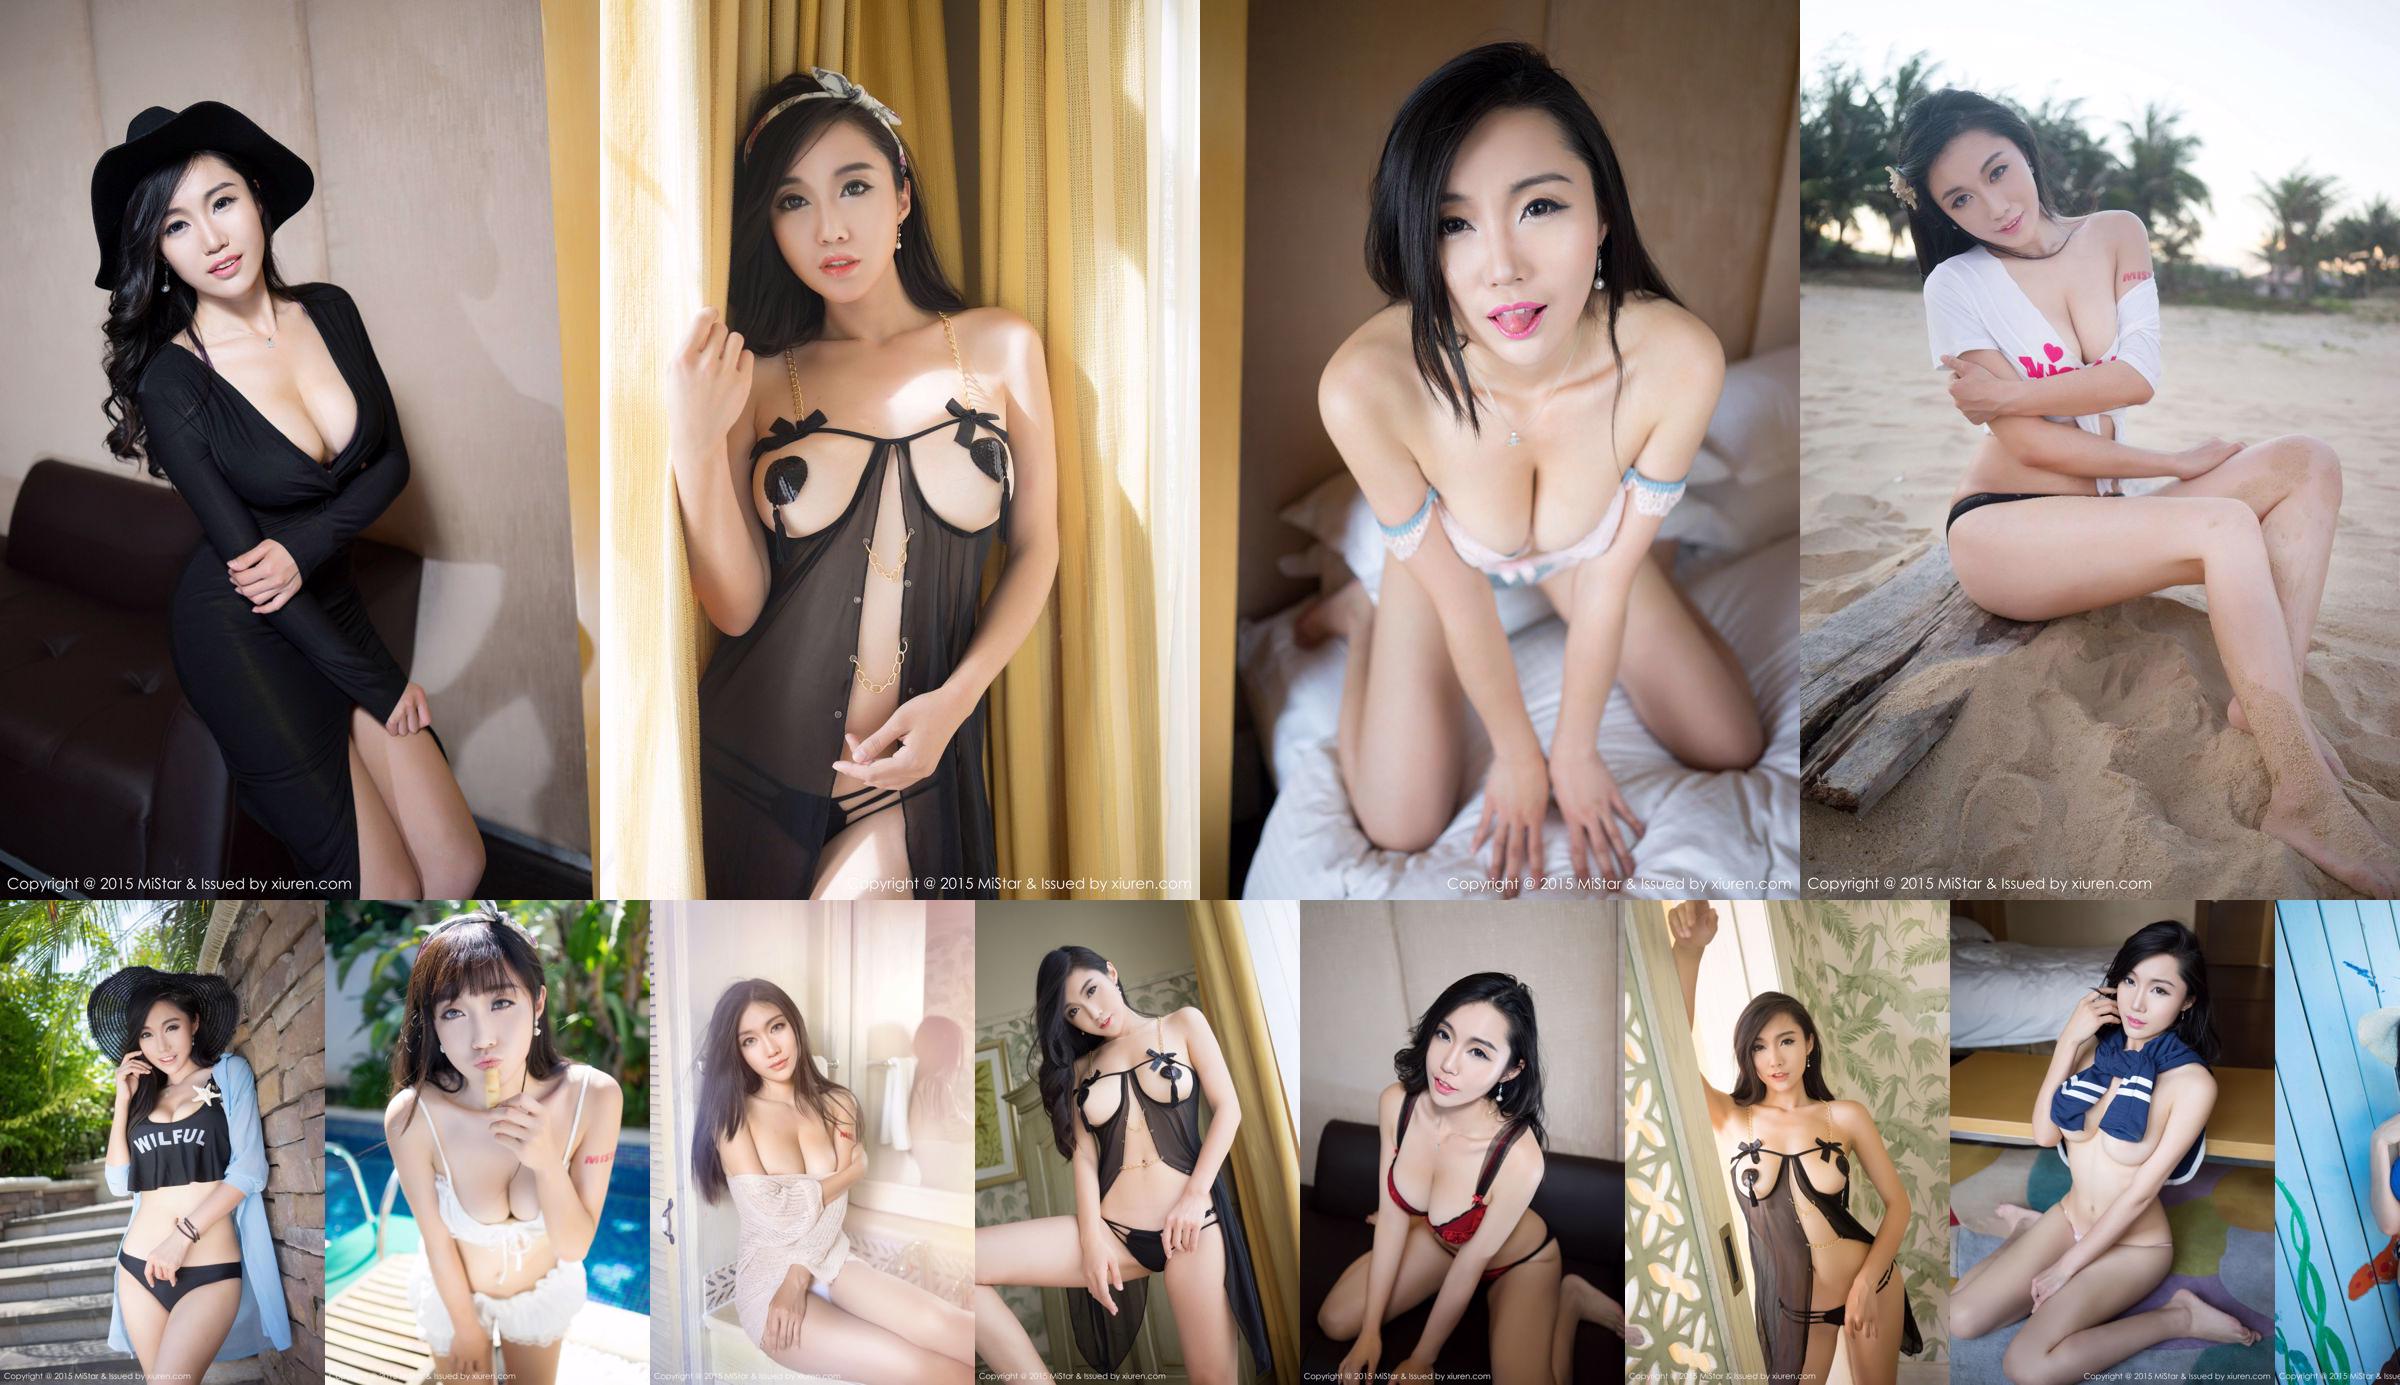 Bling "Sexy Nightwear + High Chase Temptation" [Youmihui YouMi] Vol.032 No.414bff Page 28